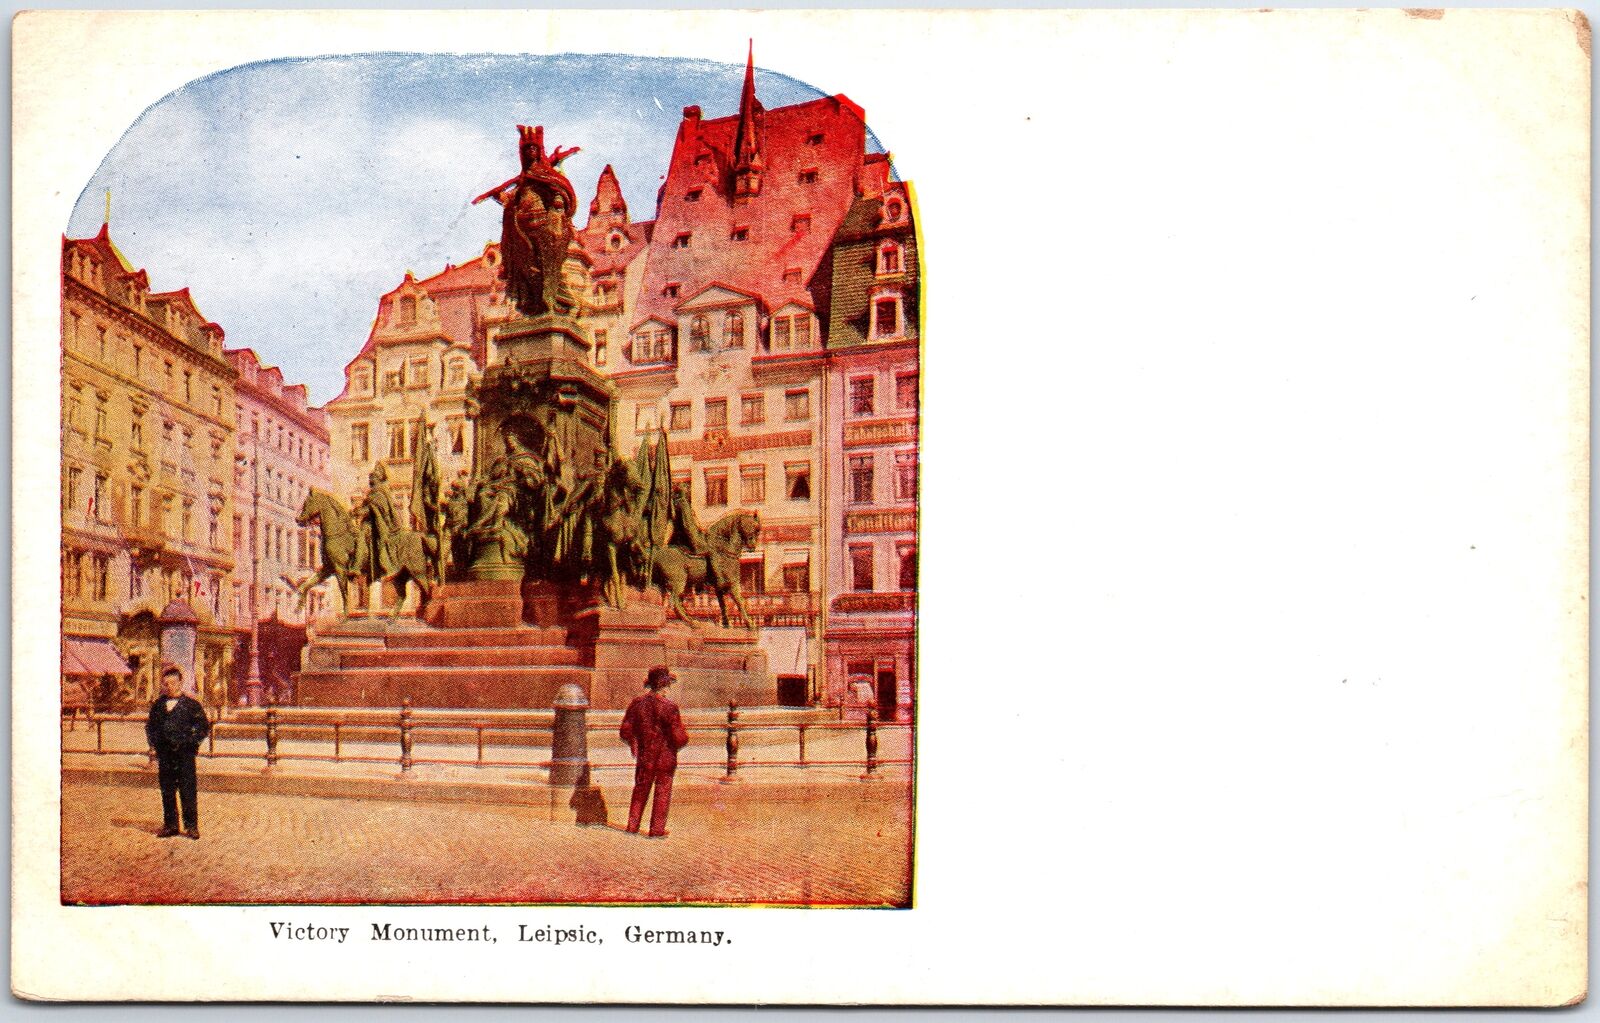 VINTAGE POSTCARD THE VICTORY MONUMENT AT LEIPZIG GERMANY c. 1910s